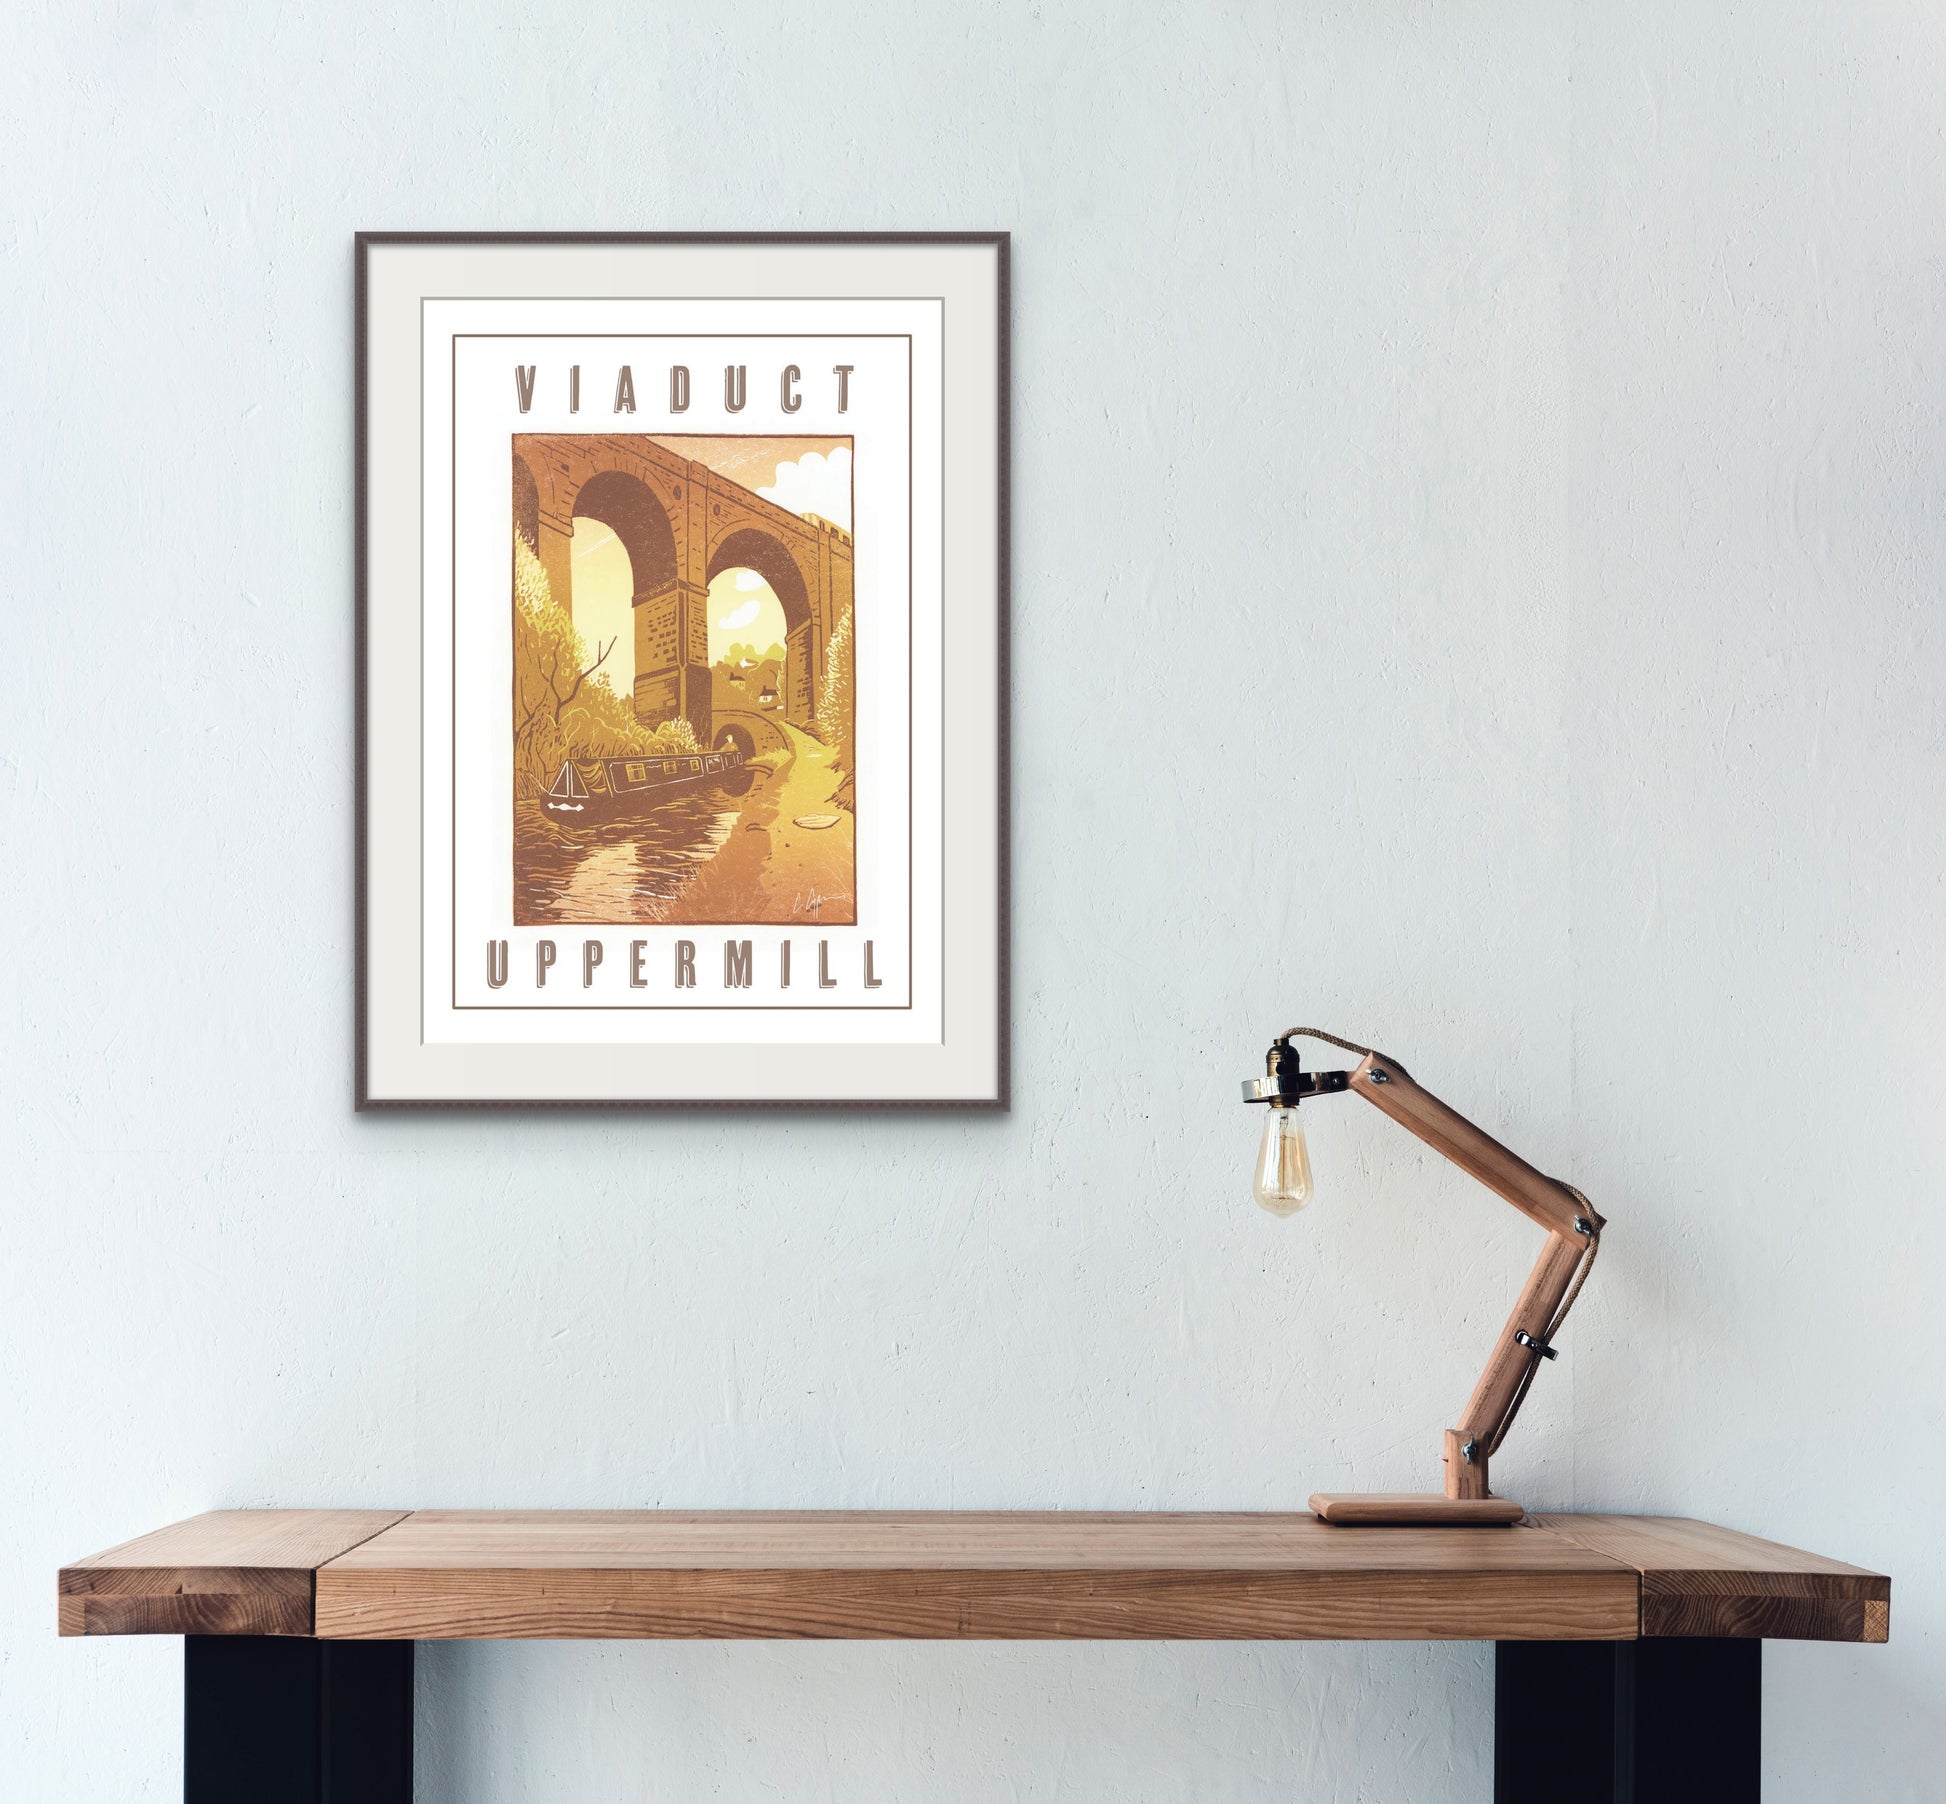 A beautiful reproduction Poster Print featuring a linocut of the viaduct over the canal at Uppermill, Oldham          A2 size         Printed on 250gsm silk board paper - sustainably sourced         Tube rolled ideal for worldwide shipping. The image shows the poster framed and displayed